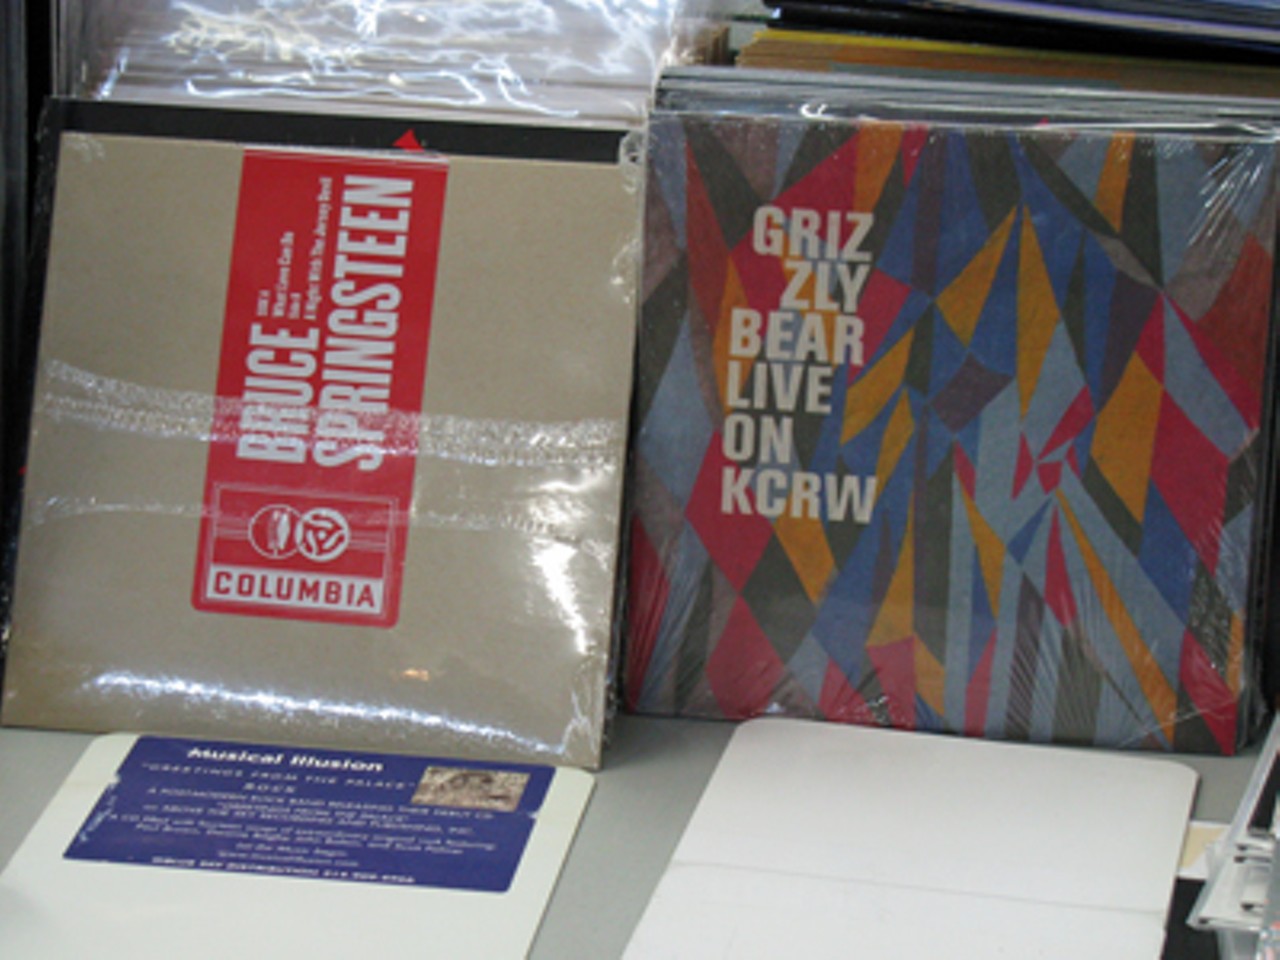 More Record Store Day exclusives, from Bruce Springsteen and Grizzly Bear.